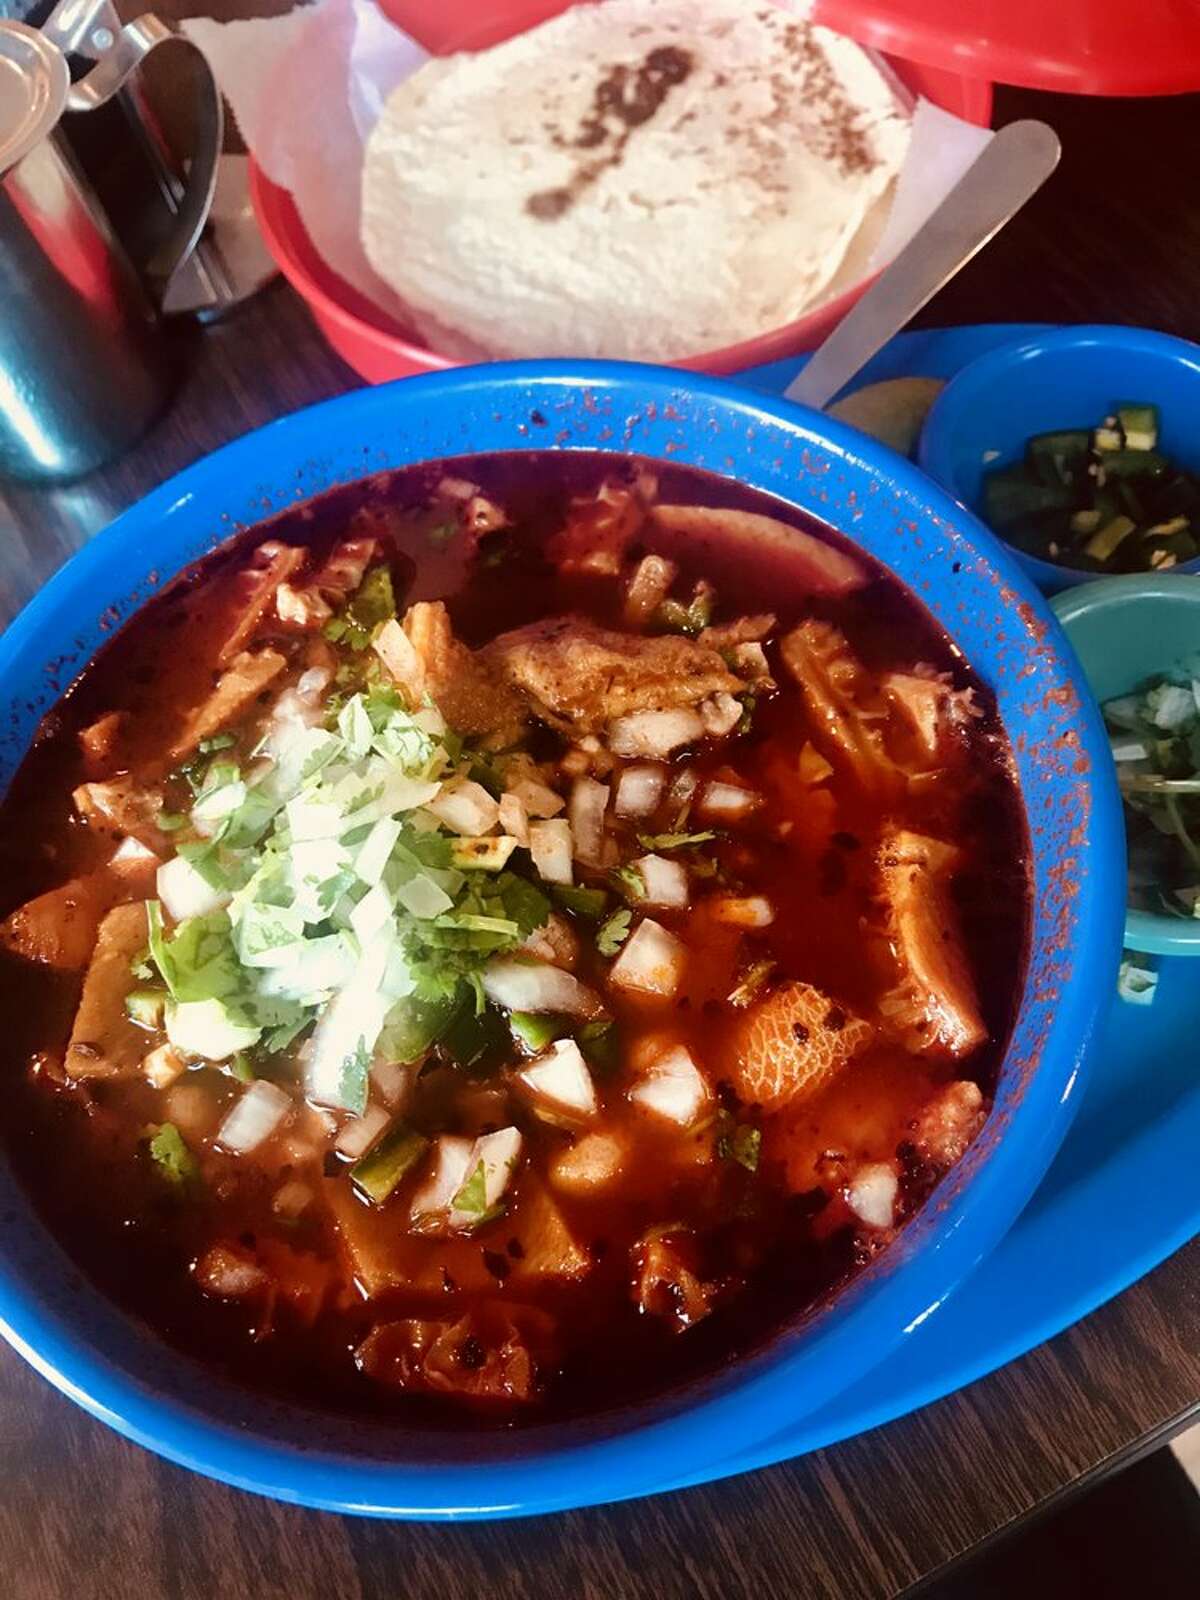 2. Puebla’s Mexican Kitchen The Heights Address: 6320 N Main St Sample review: "My husband really enjoys the menudo here and not every mom and pop place makes it right." Photo: Trujillo F.